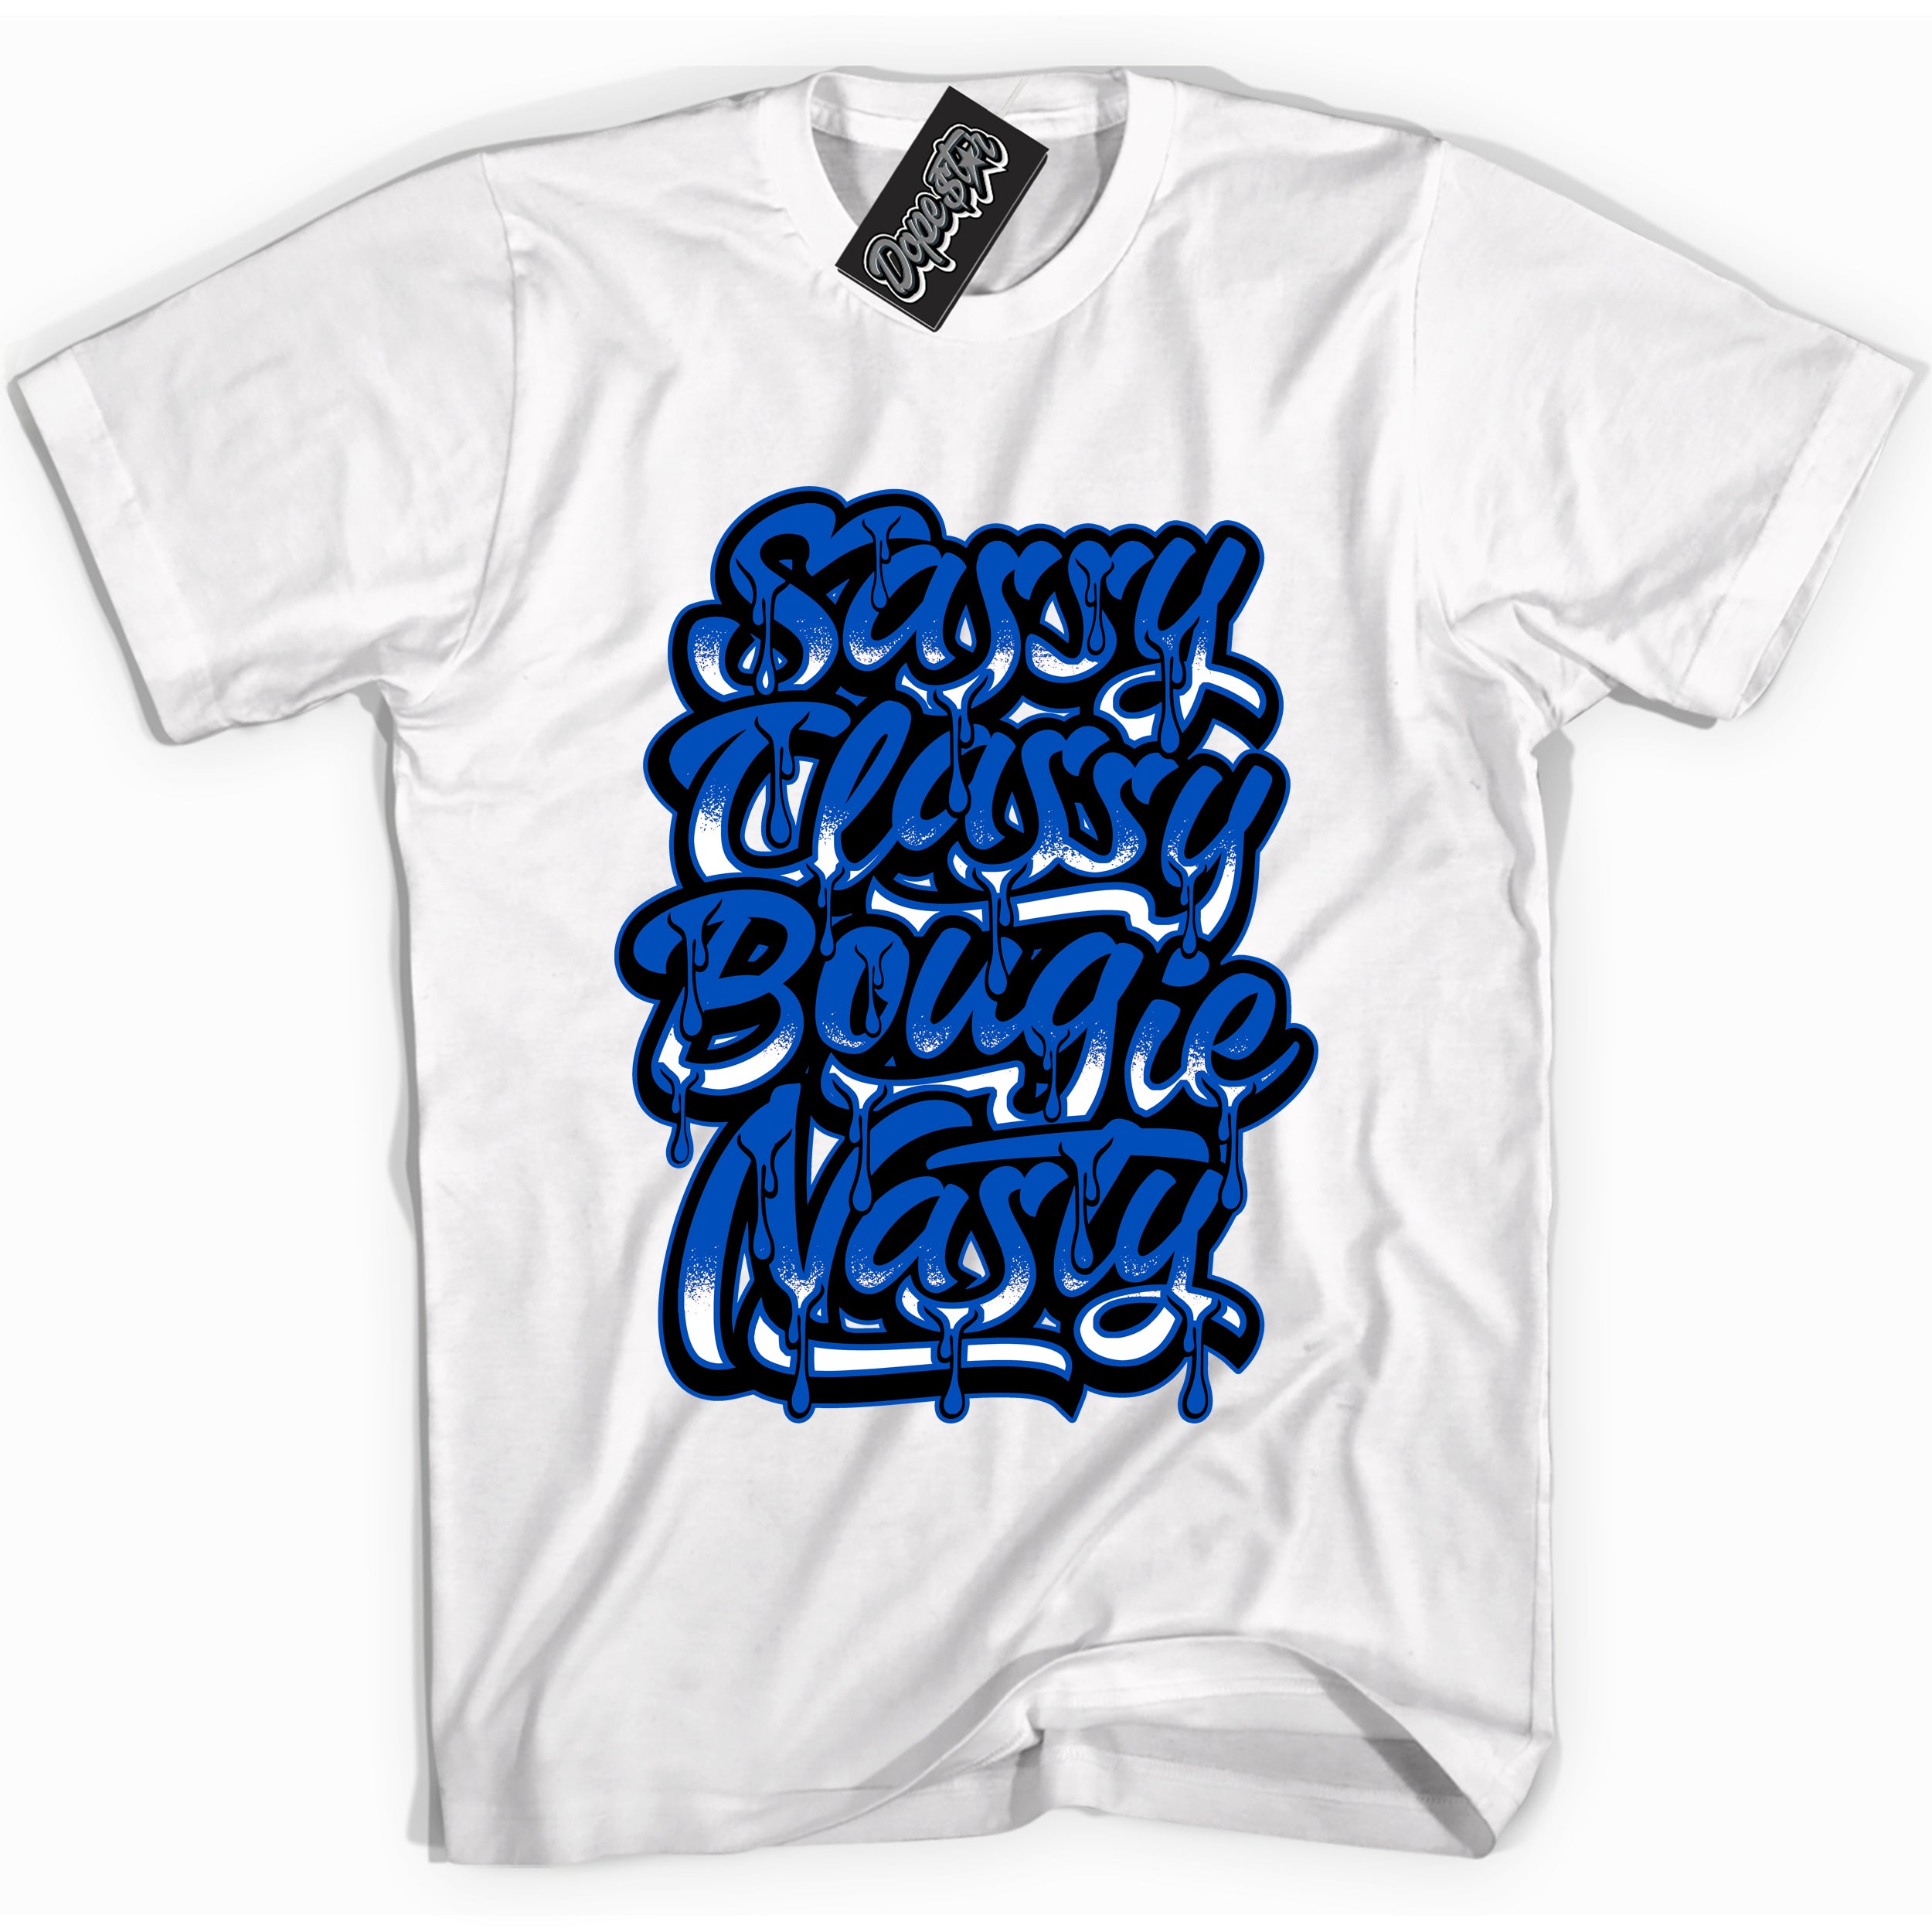 Cool White graphic tee with Sassy Classy print, that perfectly matches OG Royal Reimagined 1s sneakers 